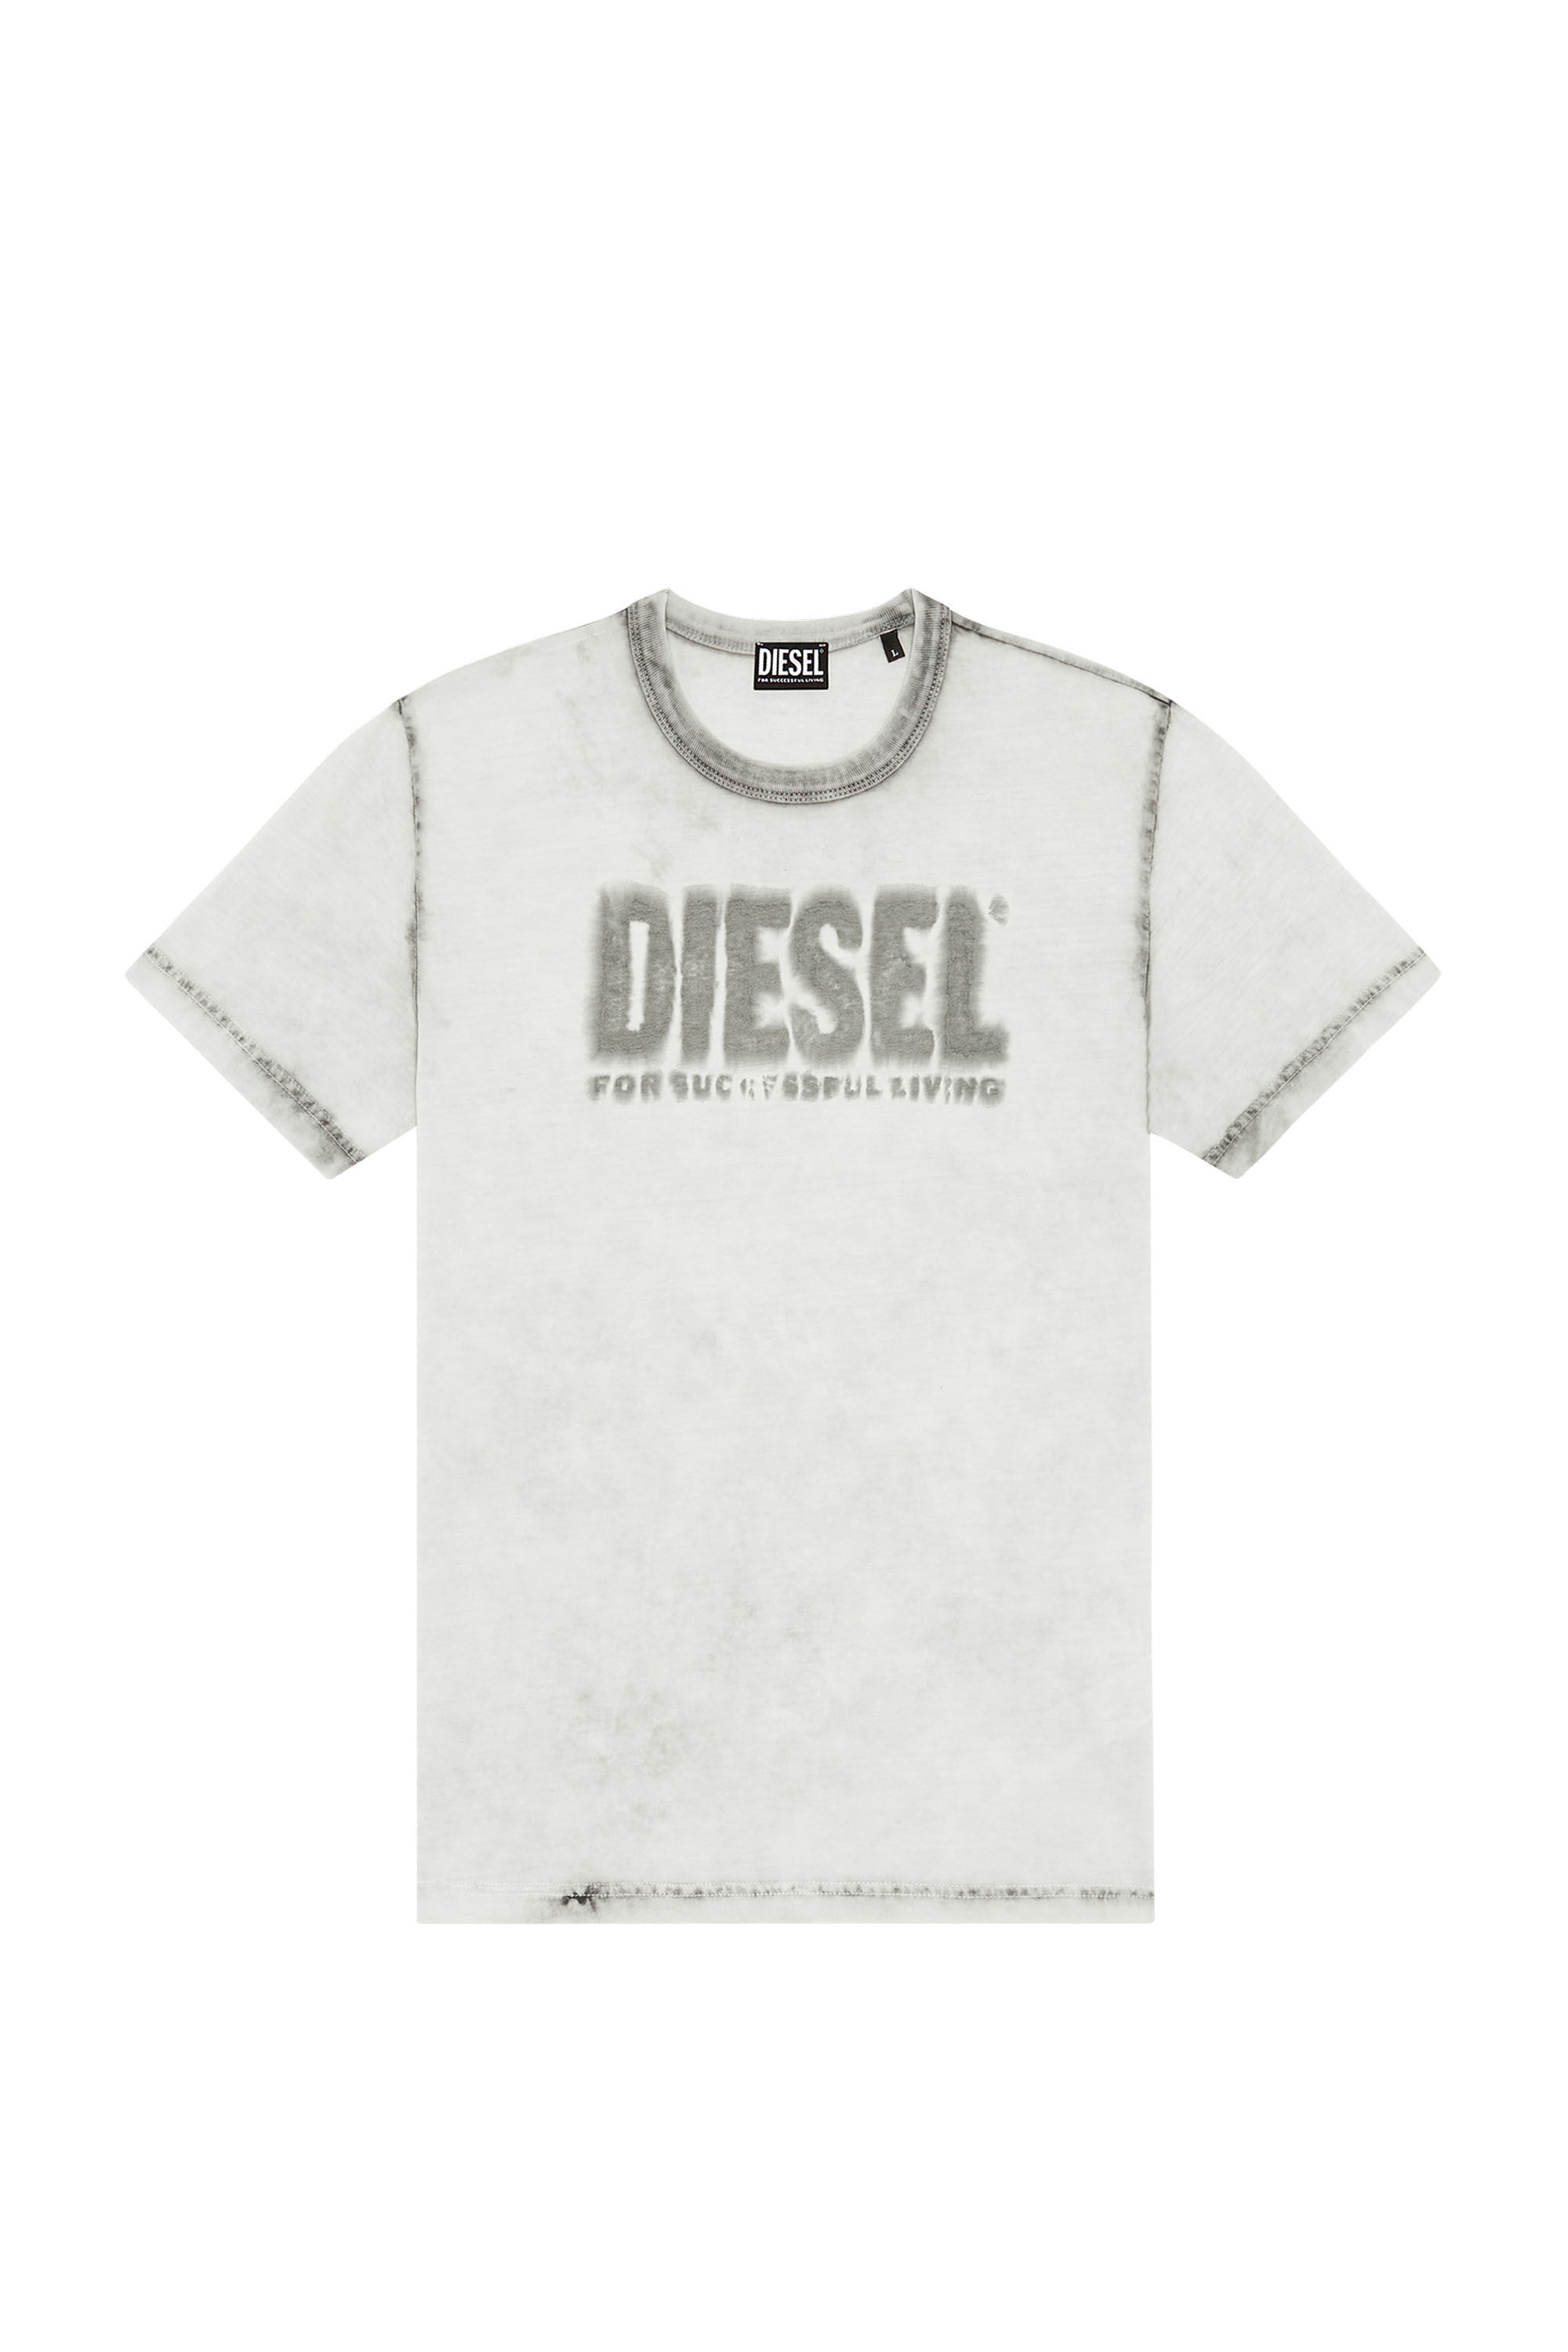 T-DIEGOR-E6 Man: T-shirt with faded logo | Diesel